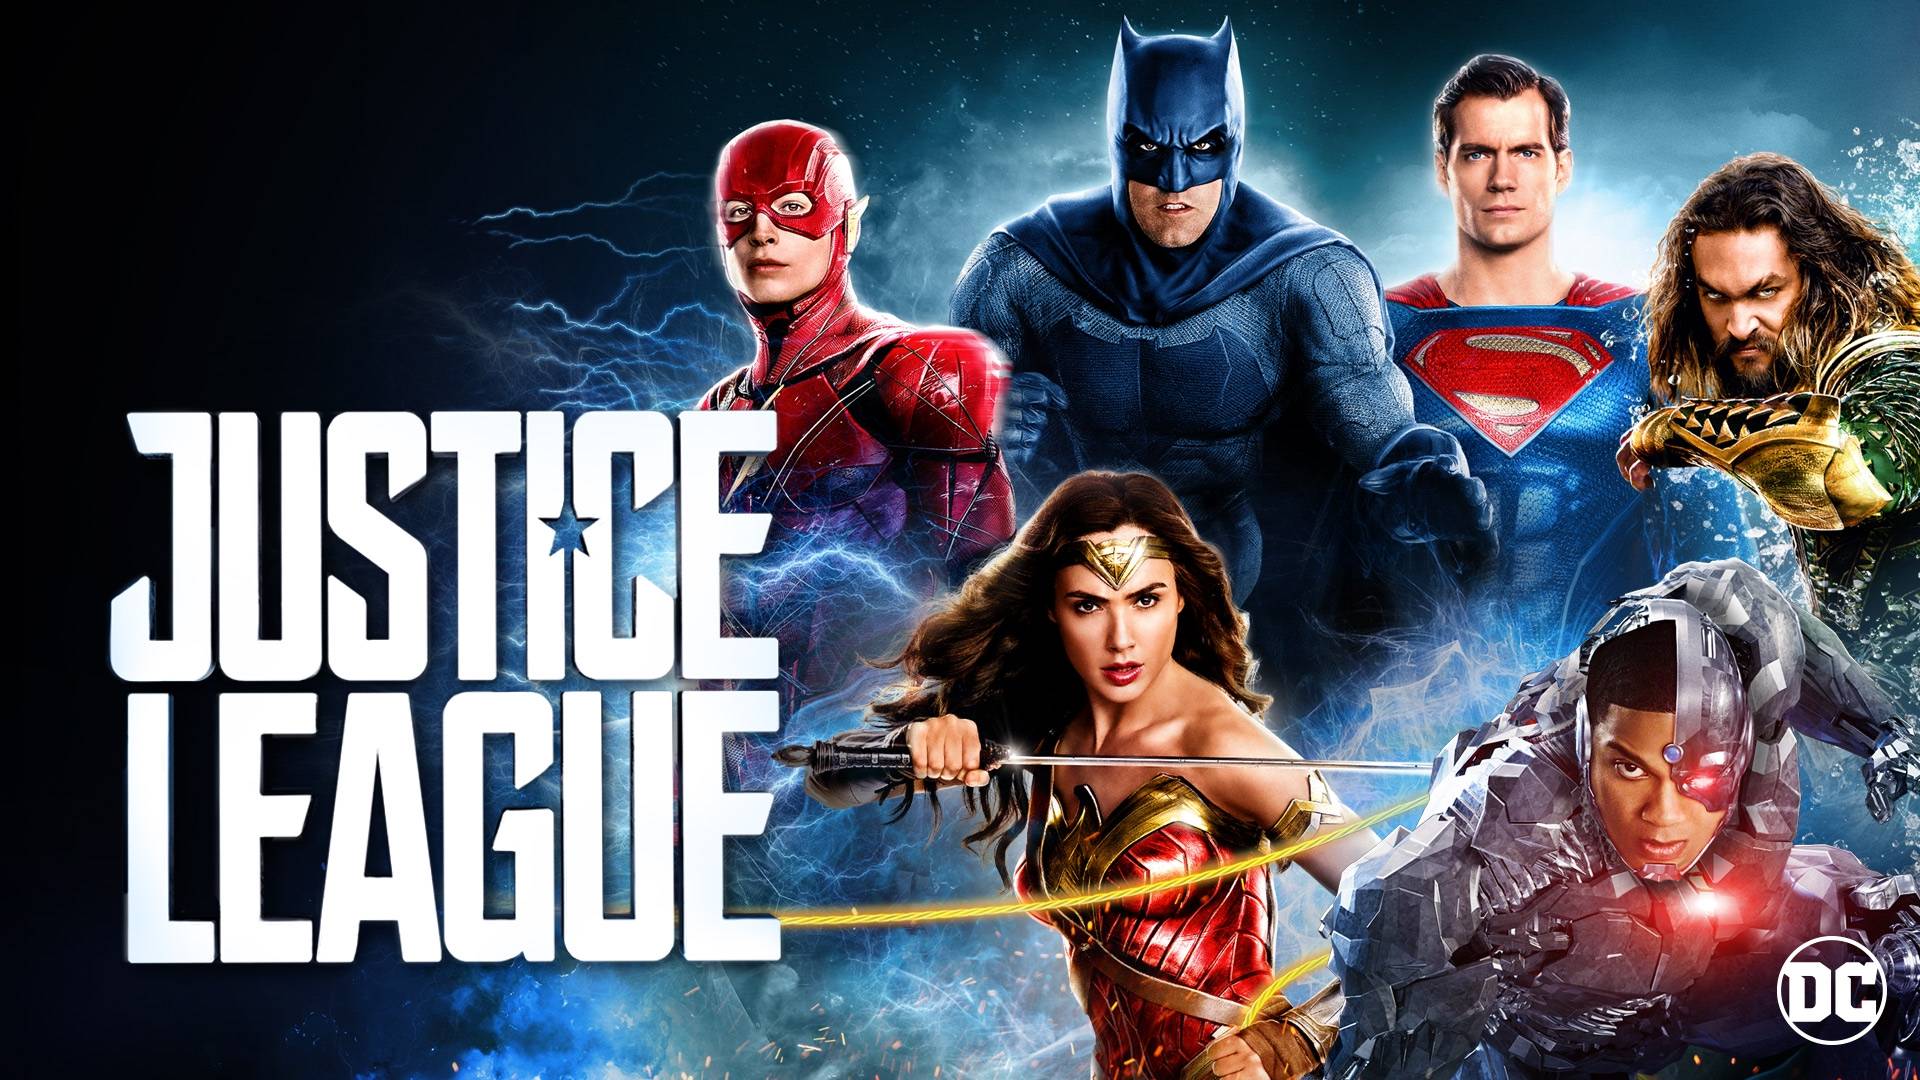 Watch Justice League (2017) Full Movie Online Free Download HD